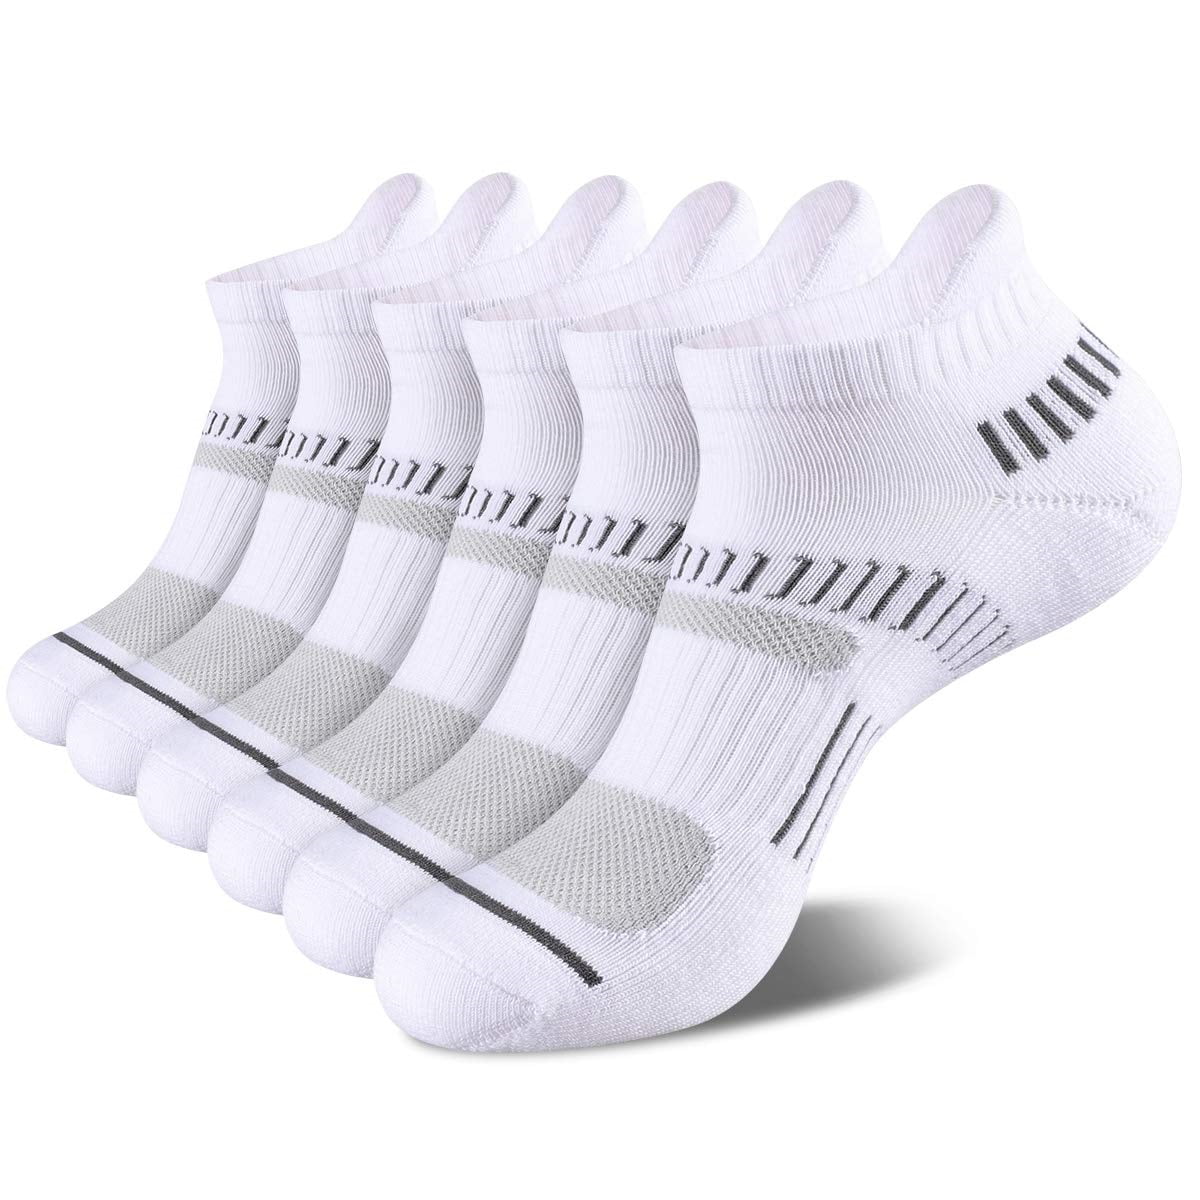 COOPLUS Male Sock Size 10-13 Men’s Athletic Ankle Performance Low Cut ...